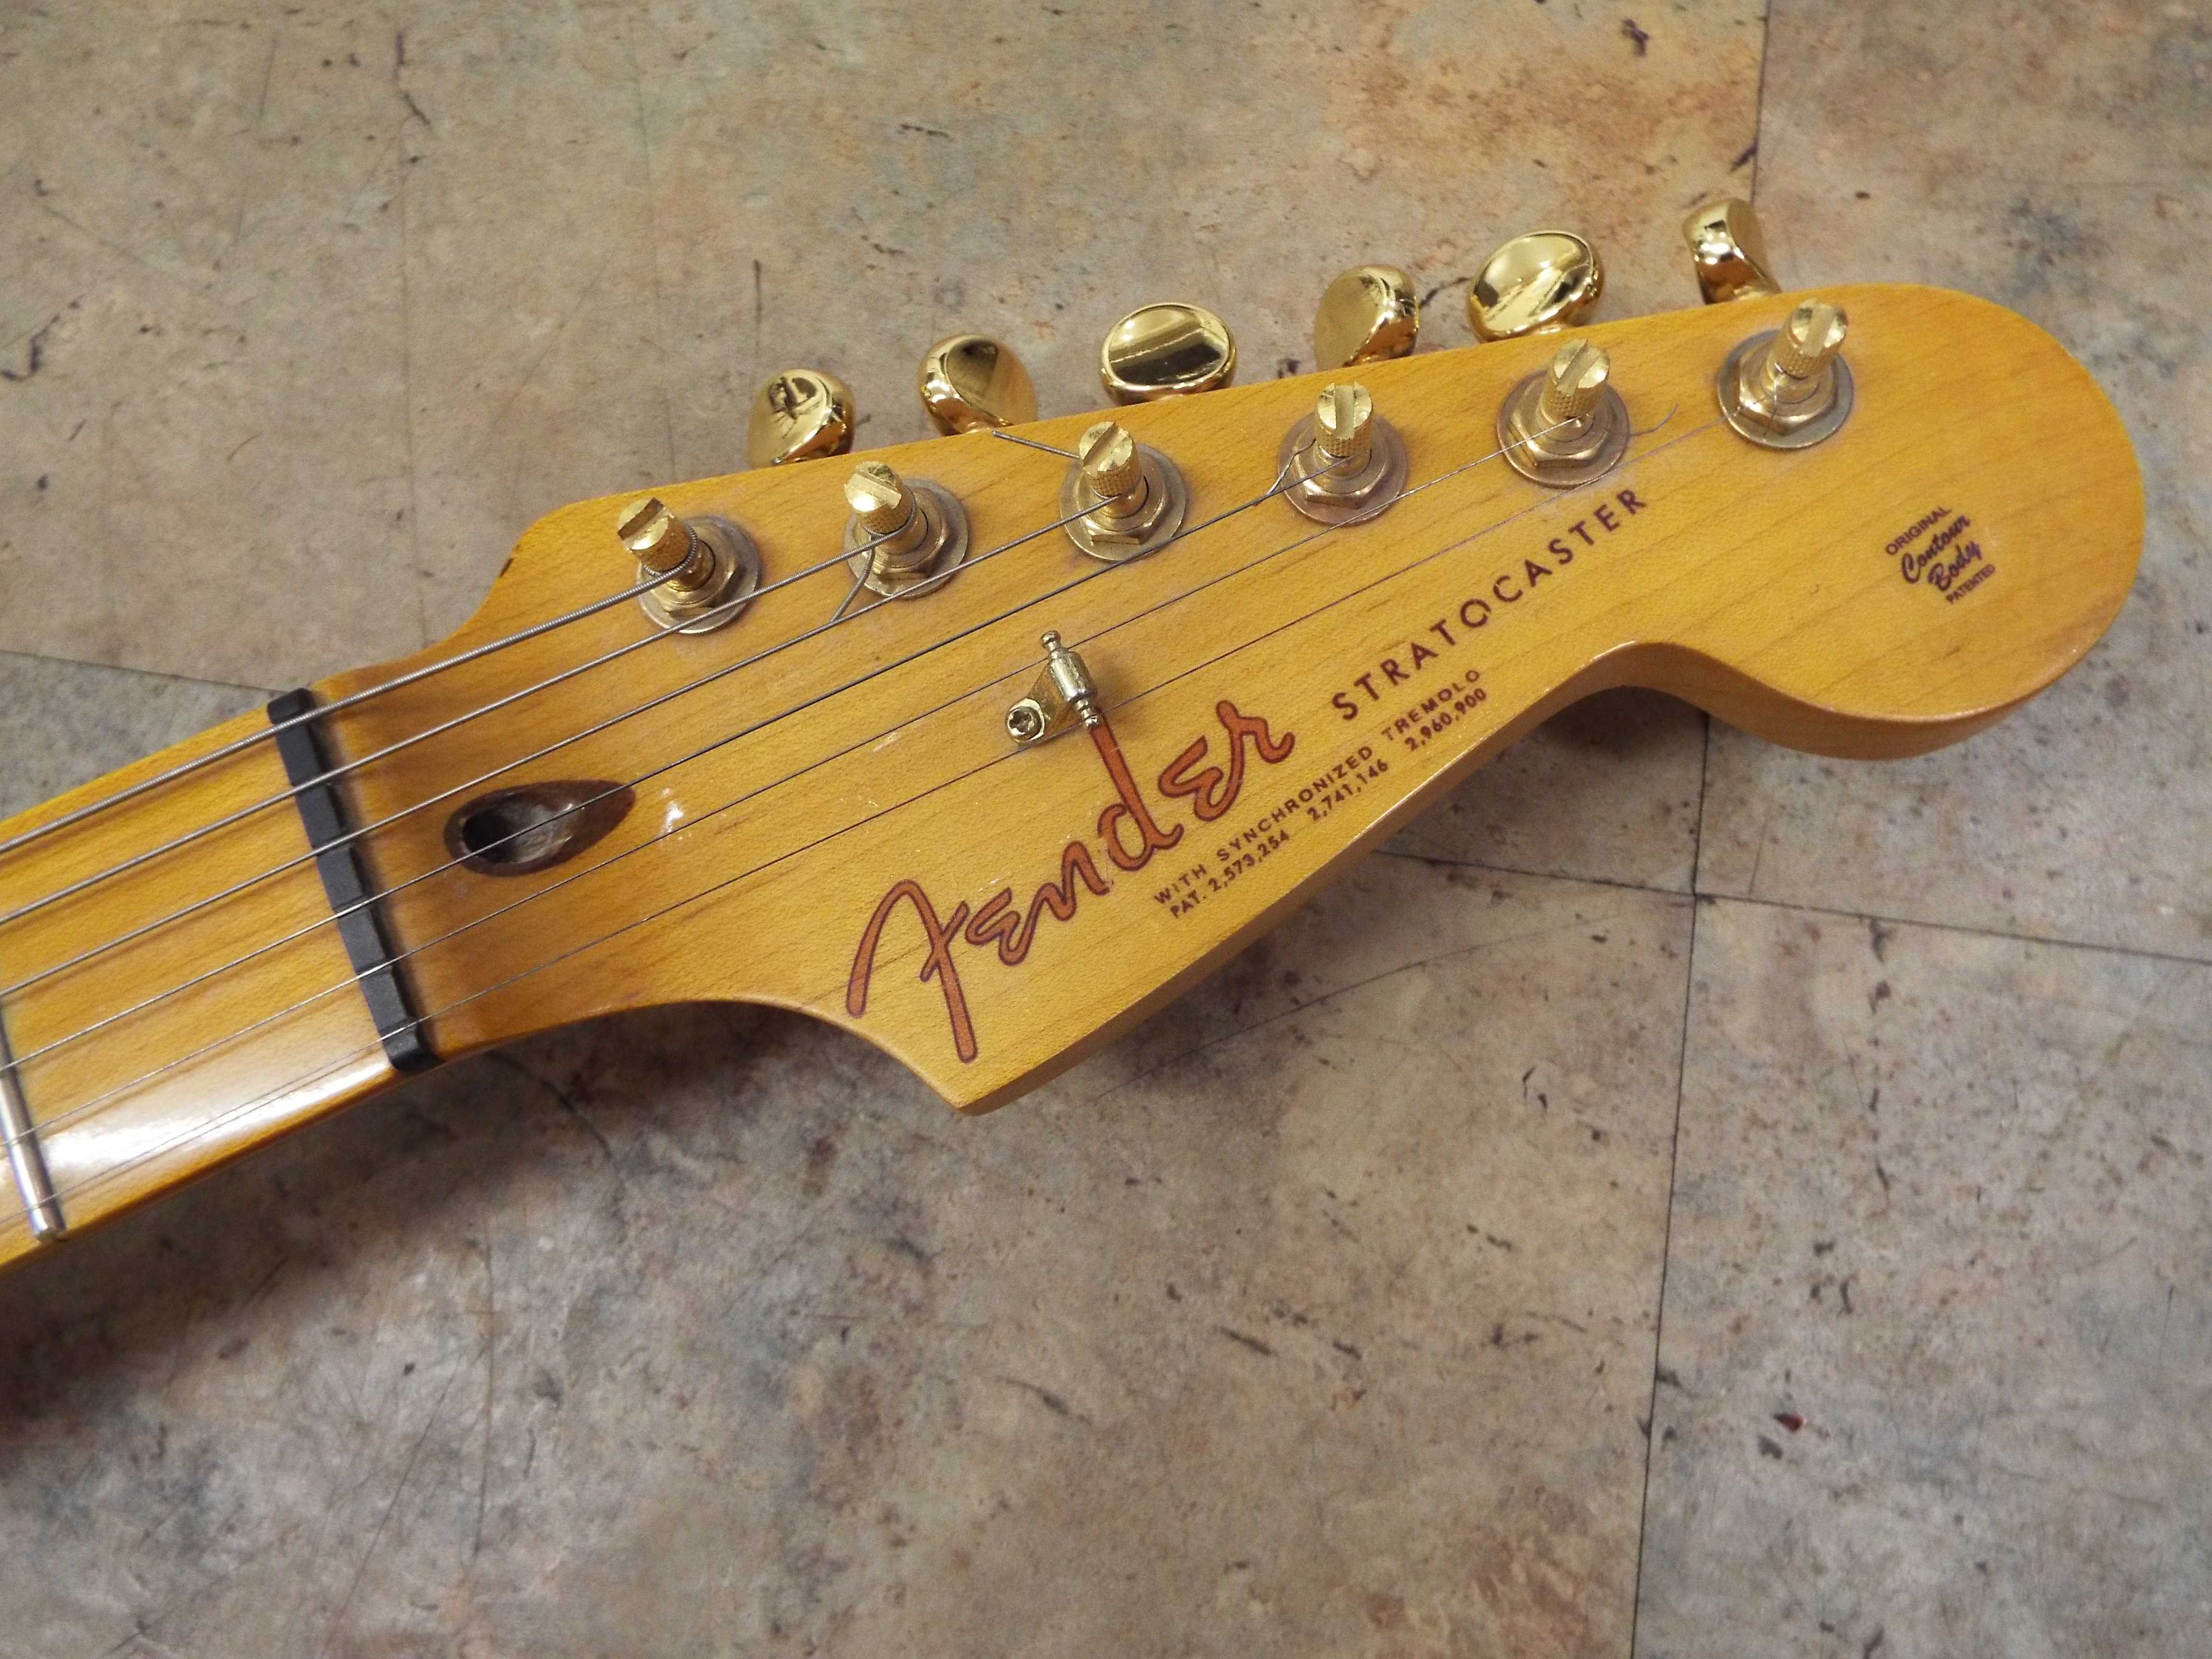 A Stratocaster shaped electric Guitar marked Fender with maple neck, - Image 4 of 8